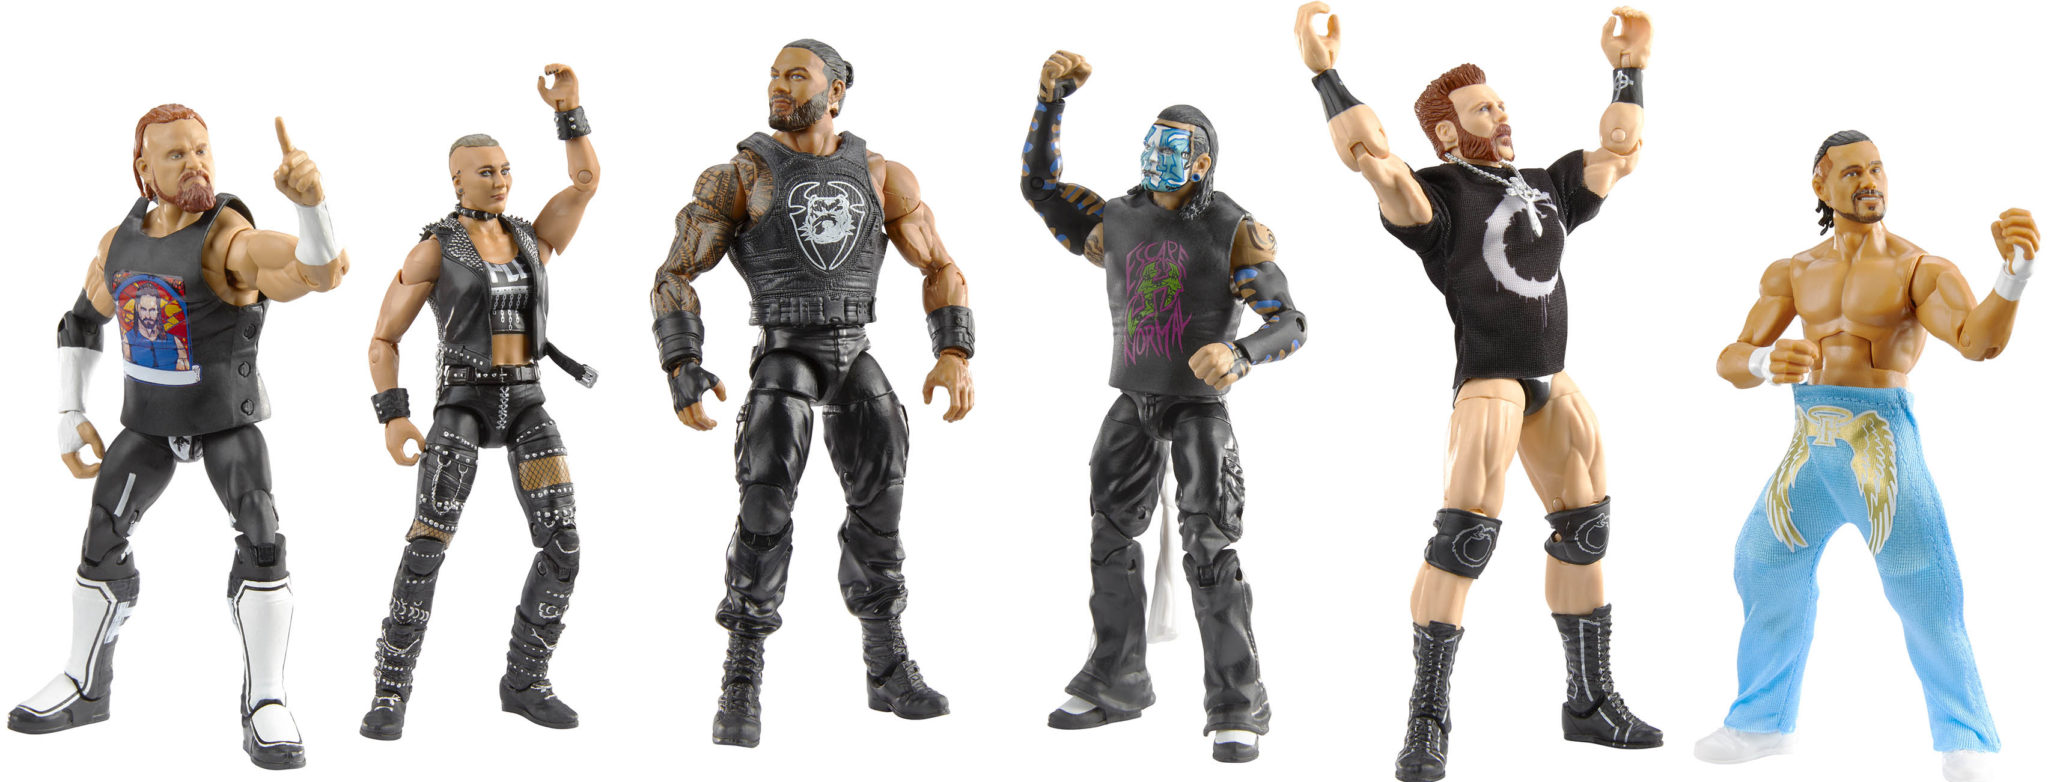 Mattel announces new WWE figures, playset, and belt The Nerdy